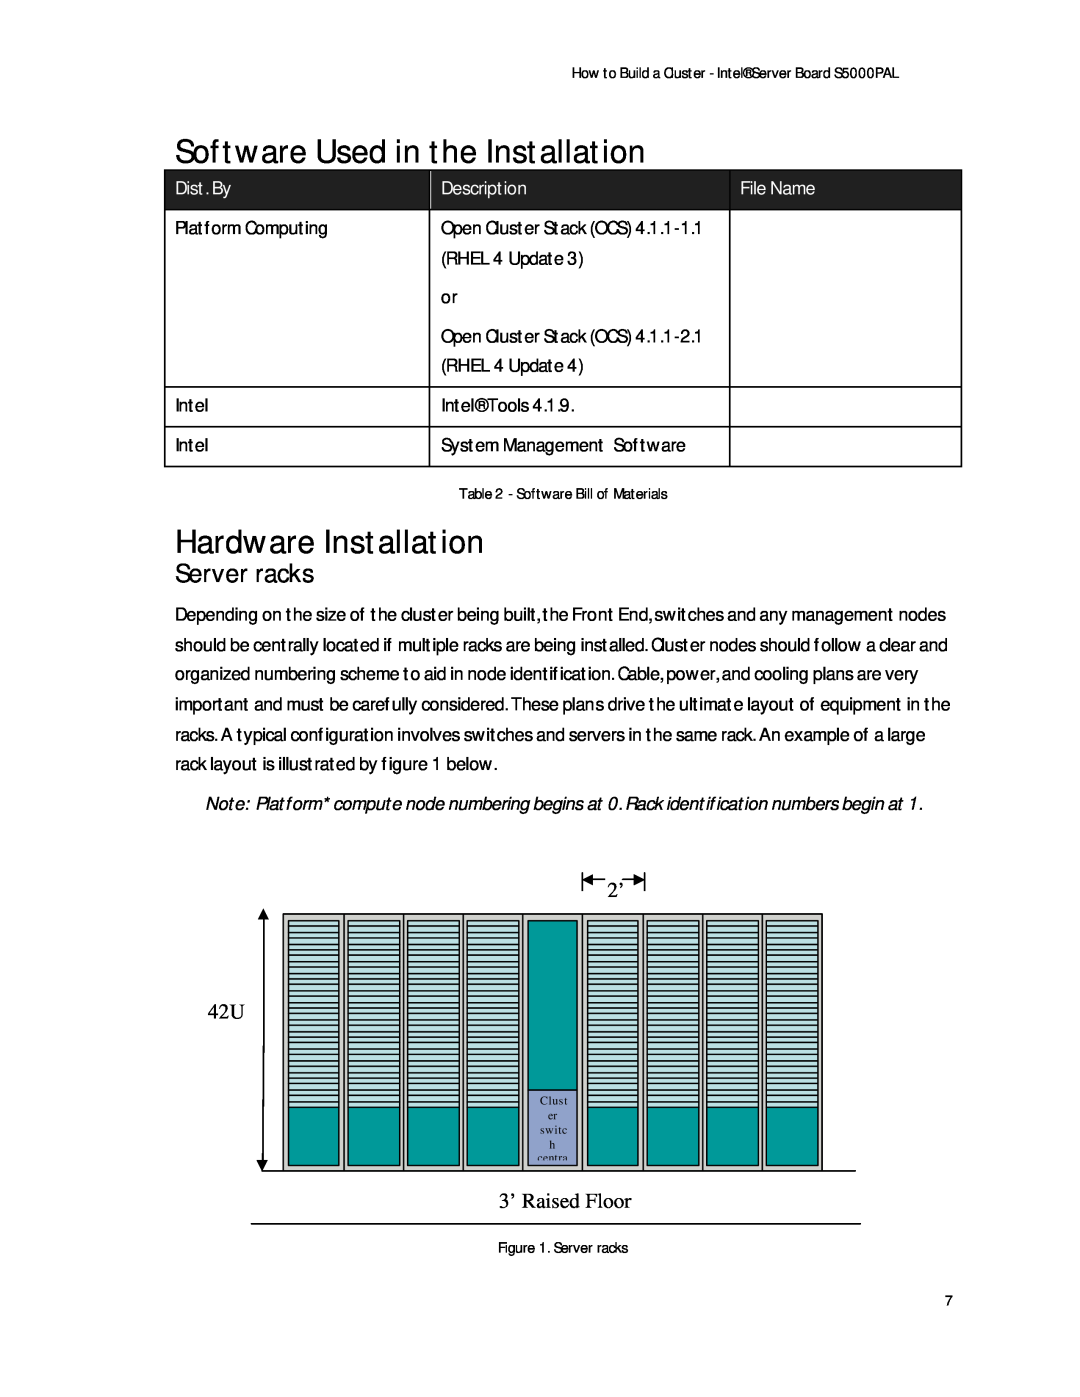 Intel S5000PAL manual Software Used in the Installation, Hardware Installation, Server racks, 3’ Raised Floor, Dist. By 